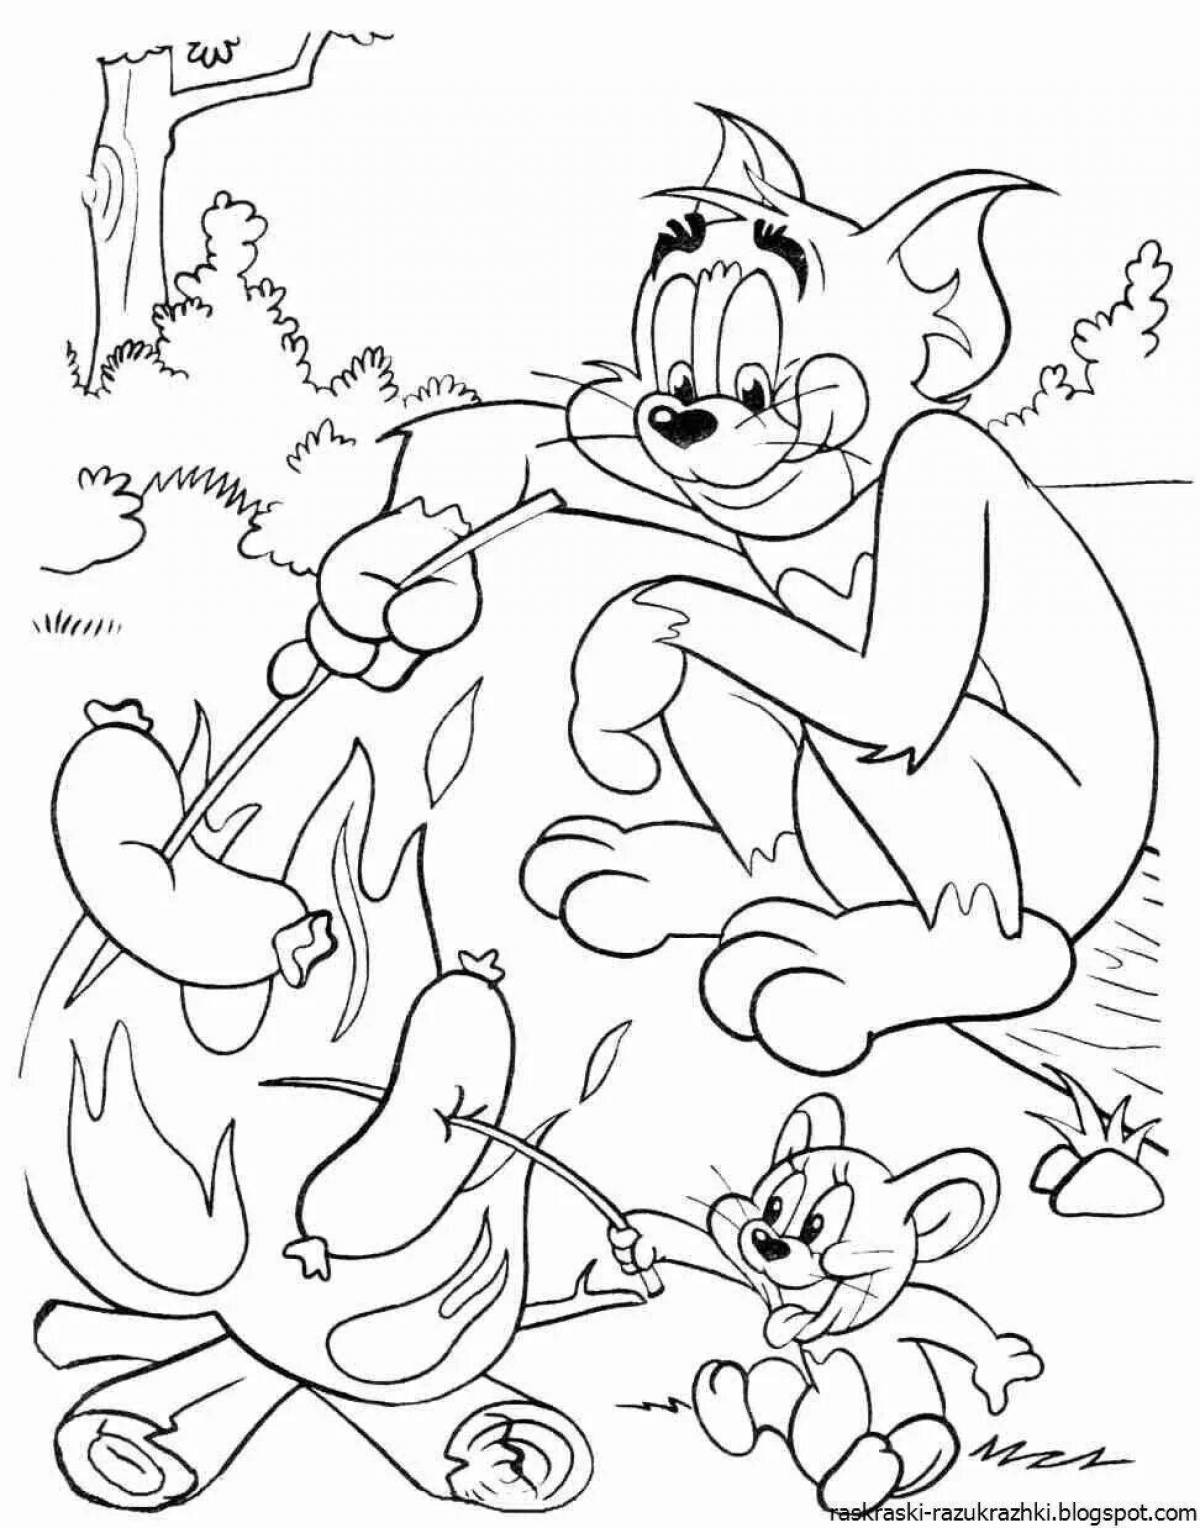 Fun cartoon characters coloring book for 6-7 year olds